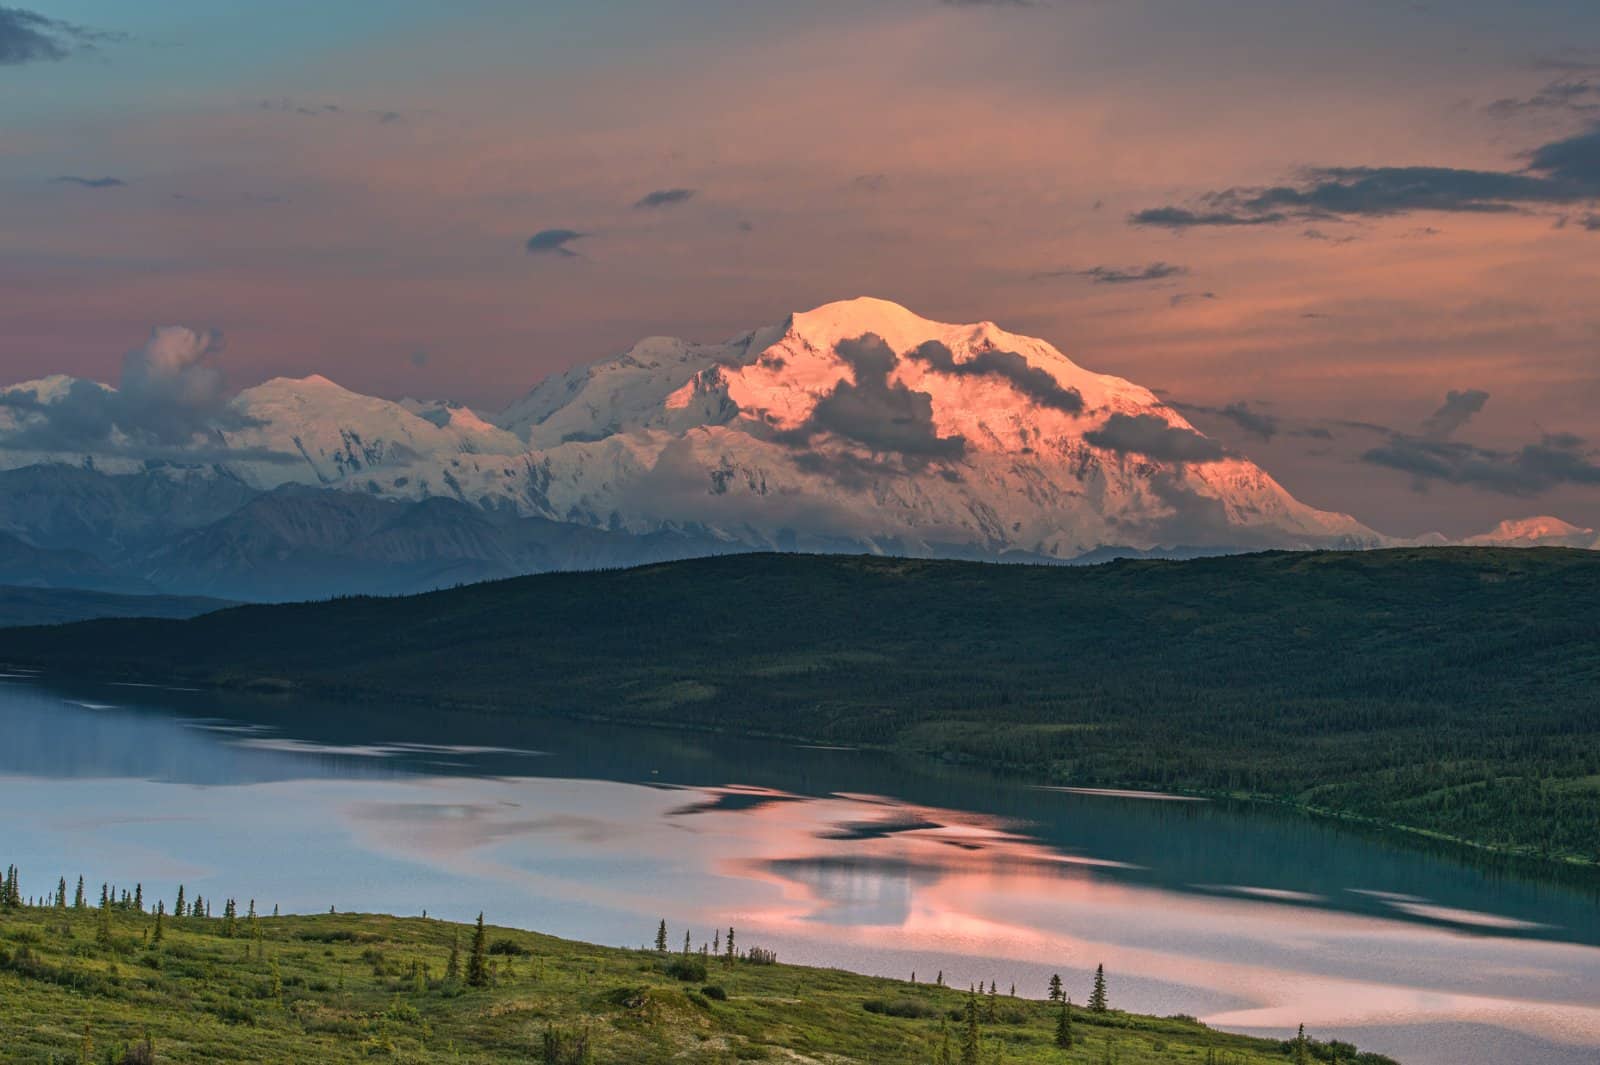 <p><span>As evening approached, I made my way to the shores of Wonder Lake, known for its mirror-like reflections of Denali on clear days. The setting sun painted the sky with hues of pink and orange. It casts a magical glow over the iconic peak. The tranquility of the lake and the silhouette of Denali created a surreal and unforgettable moment.</span></p> <p><span>The experience was a fitting end to a day filled with exploration, adventure, and a deep connection to the untamed beauty of Denali National Park.</span></p>